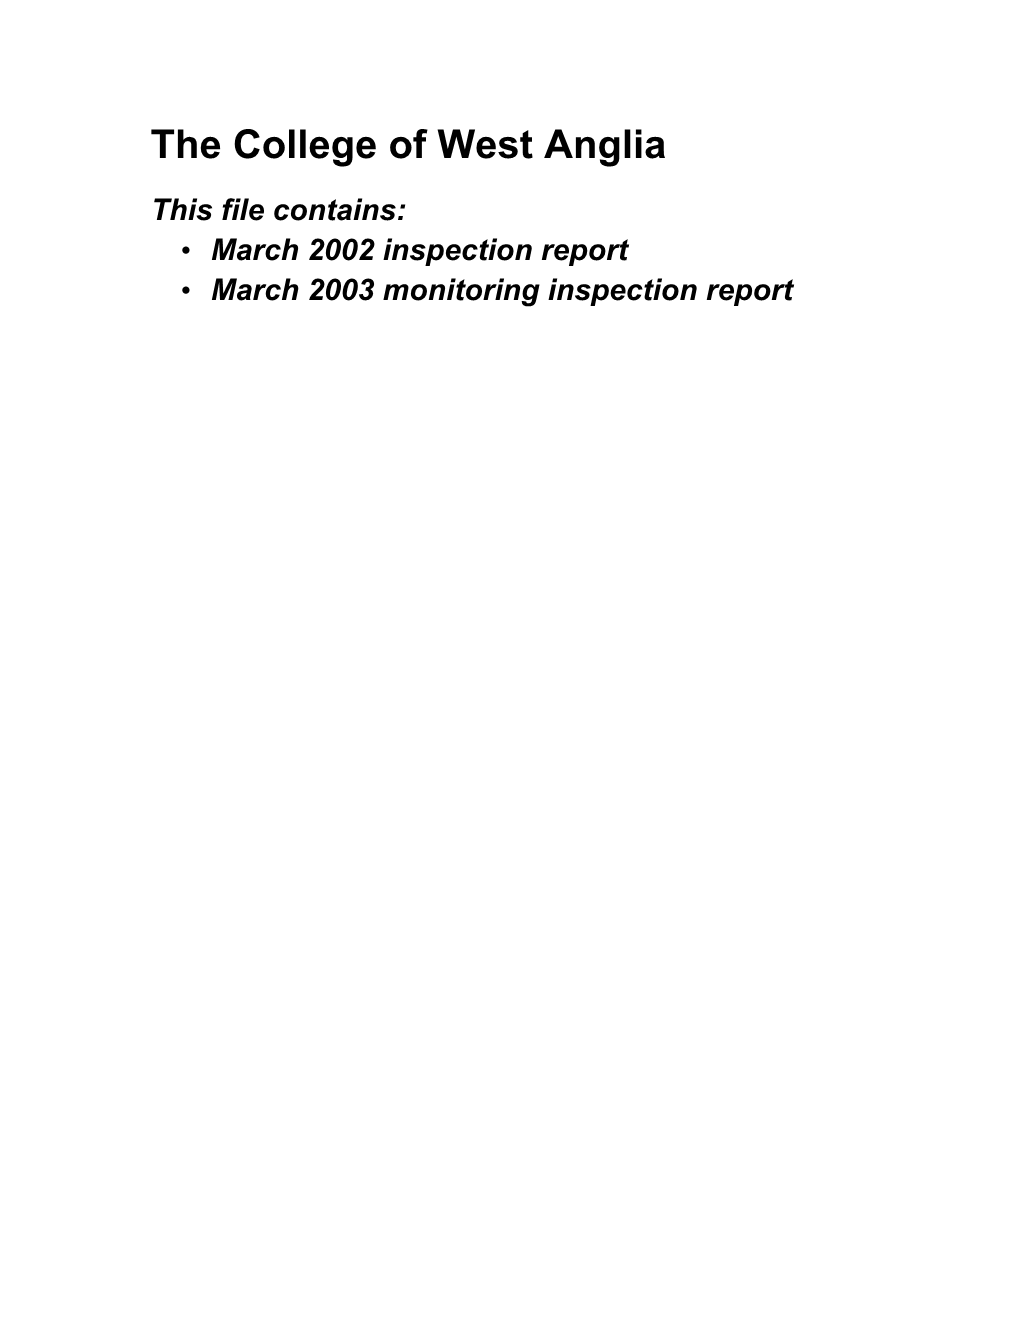 The College of West Anglia This File Contains: • March 2002 Inspection Report • March 2003 Monitoring Inspection Report